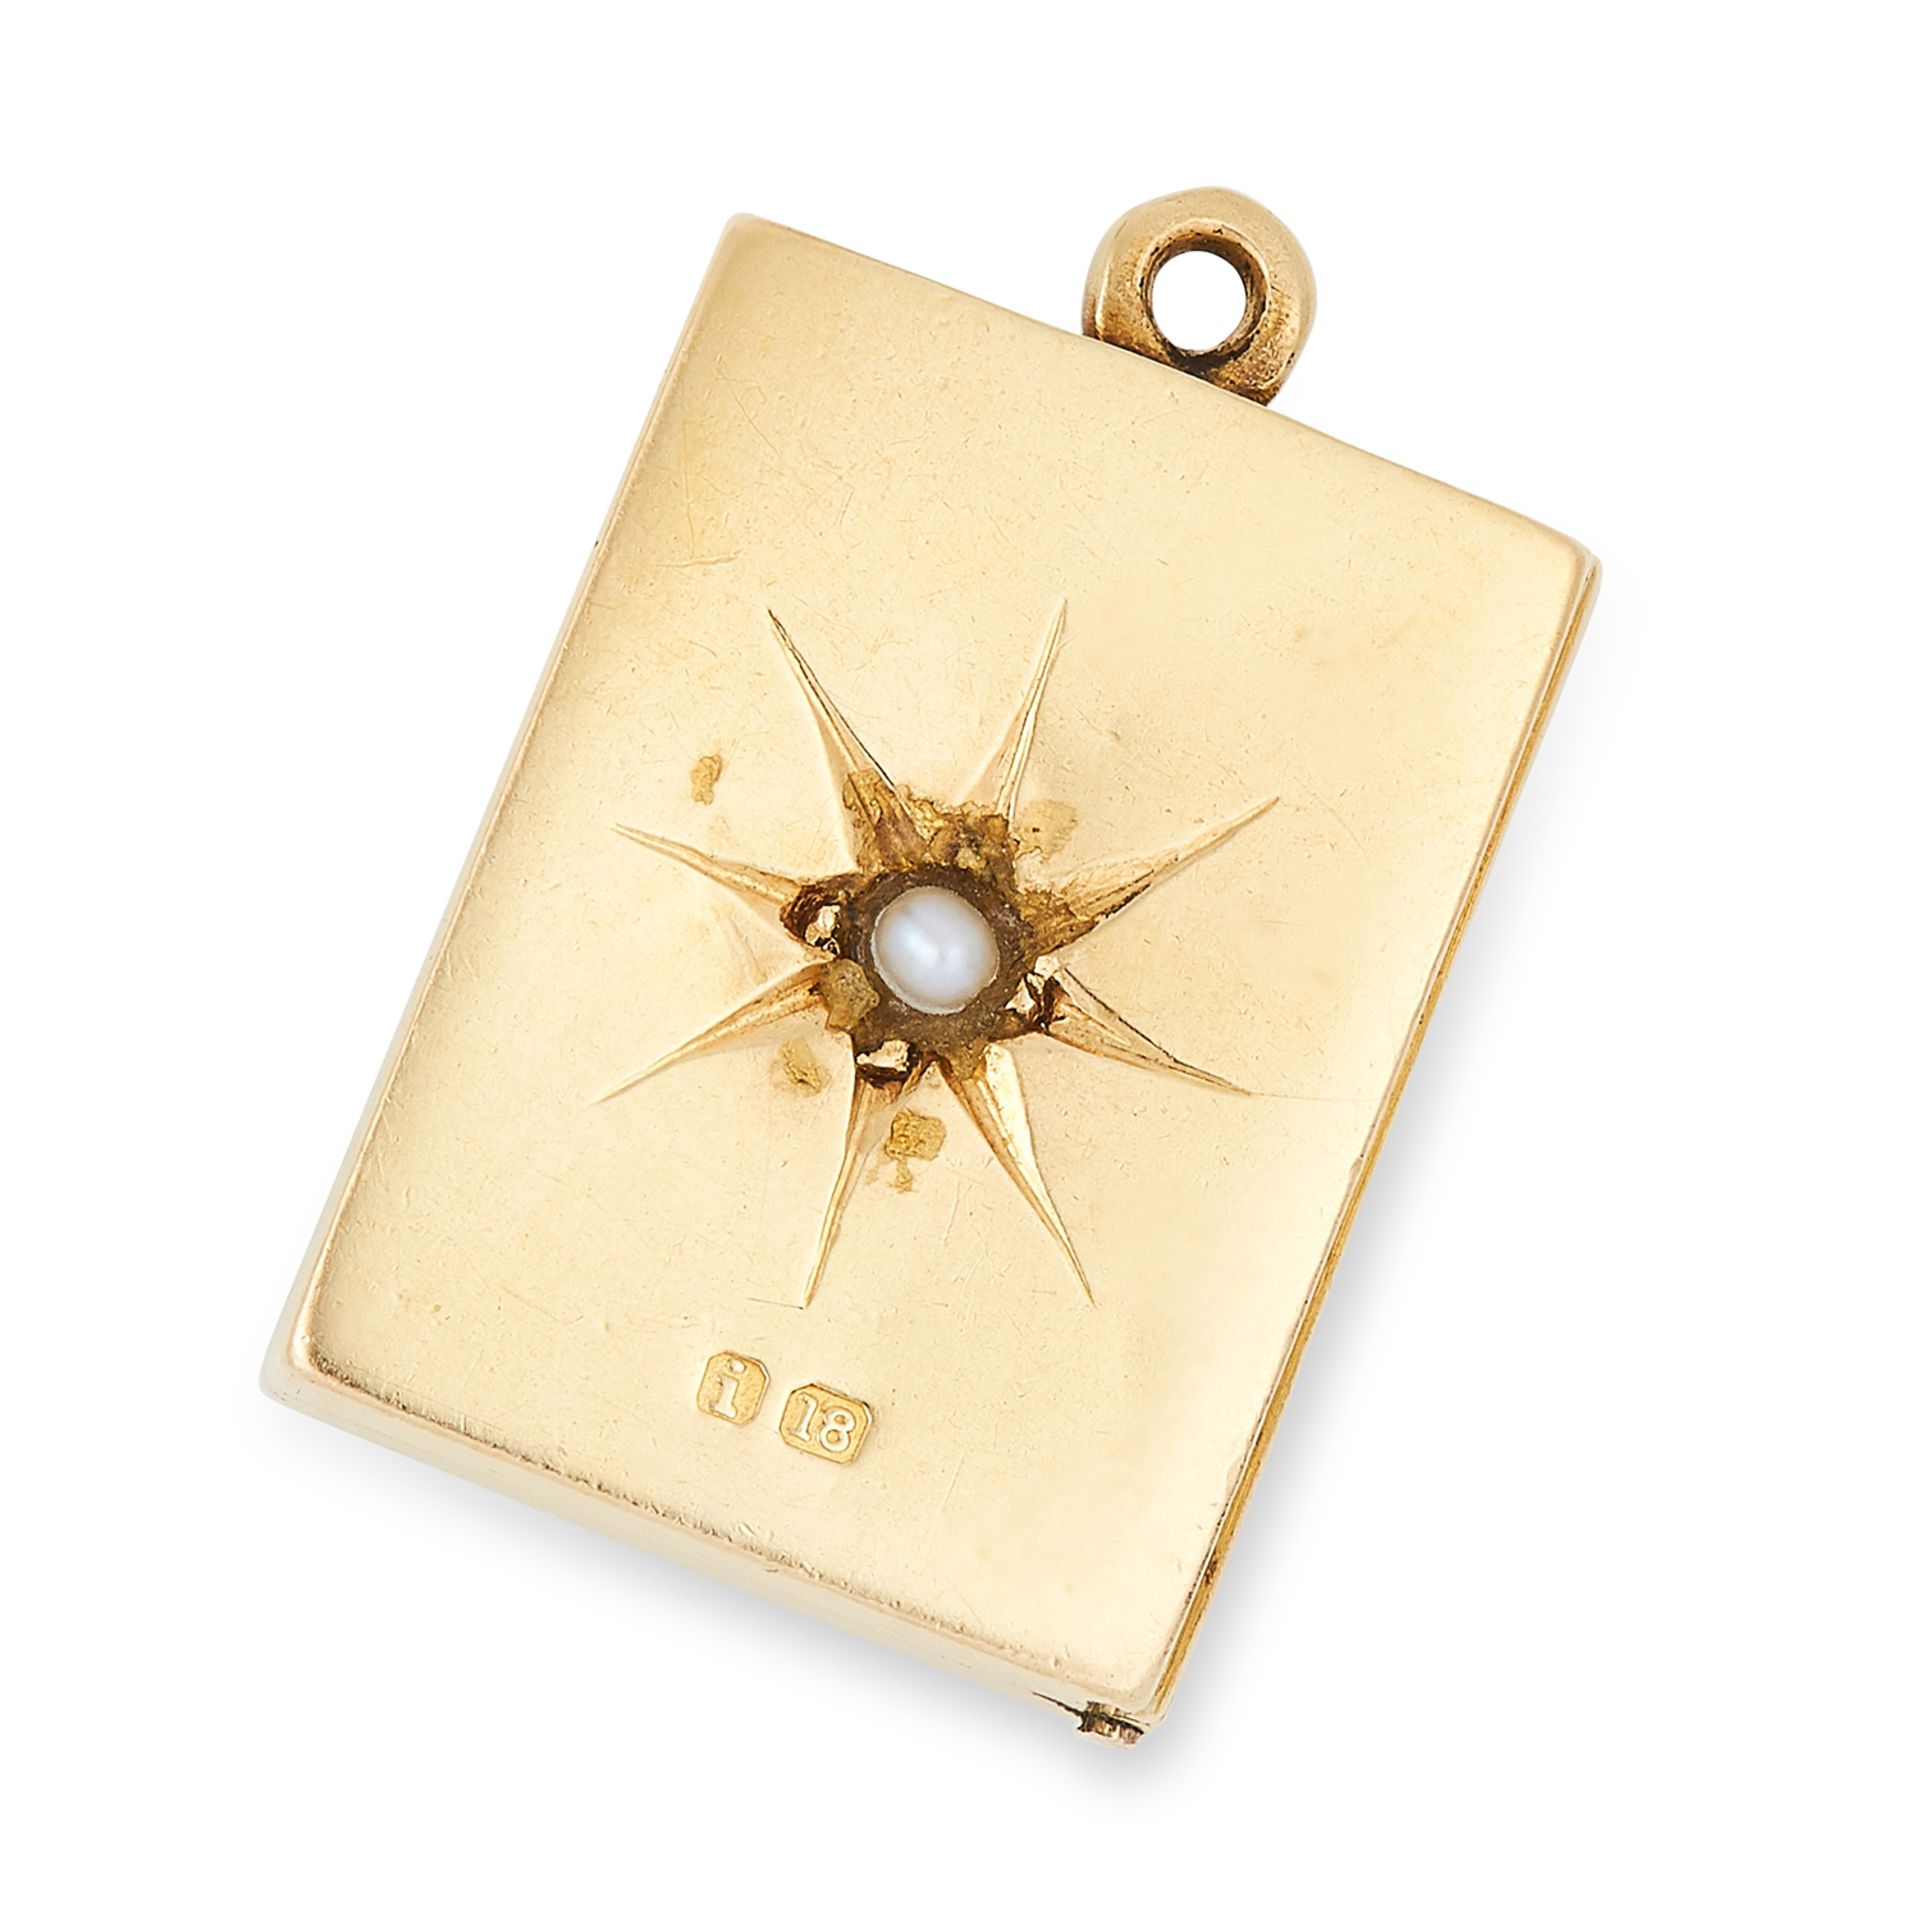 ANTIQUE SEED PEARL BOOK CHARM / PENDANT designed as an opening book, set with a seed pearl in star